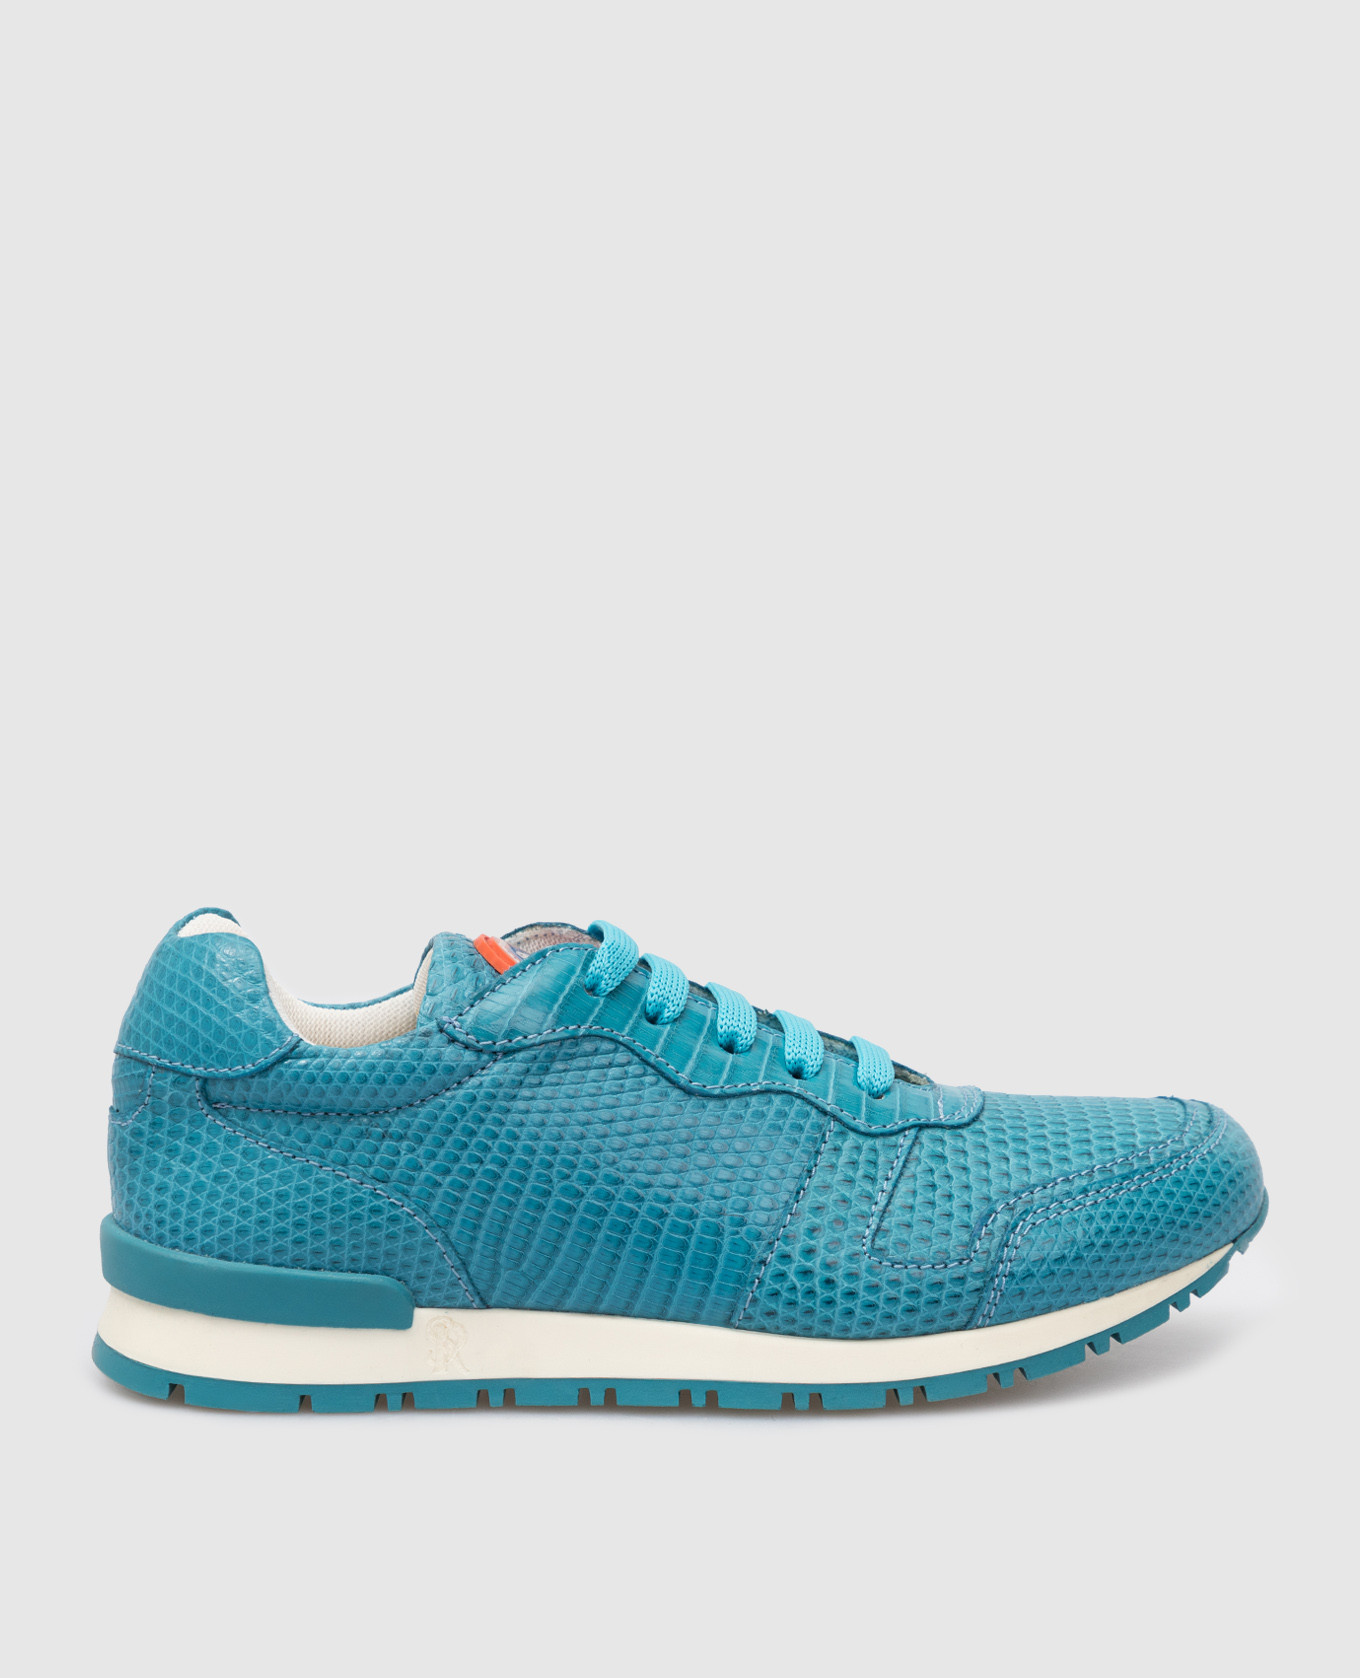 Children's turquoise sneakers made of monitor lizard skin